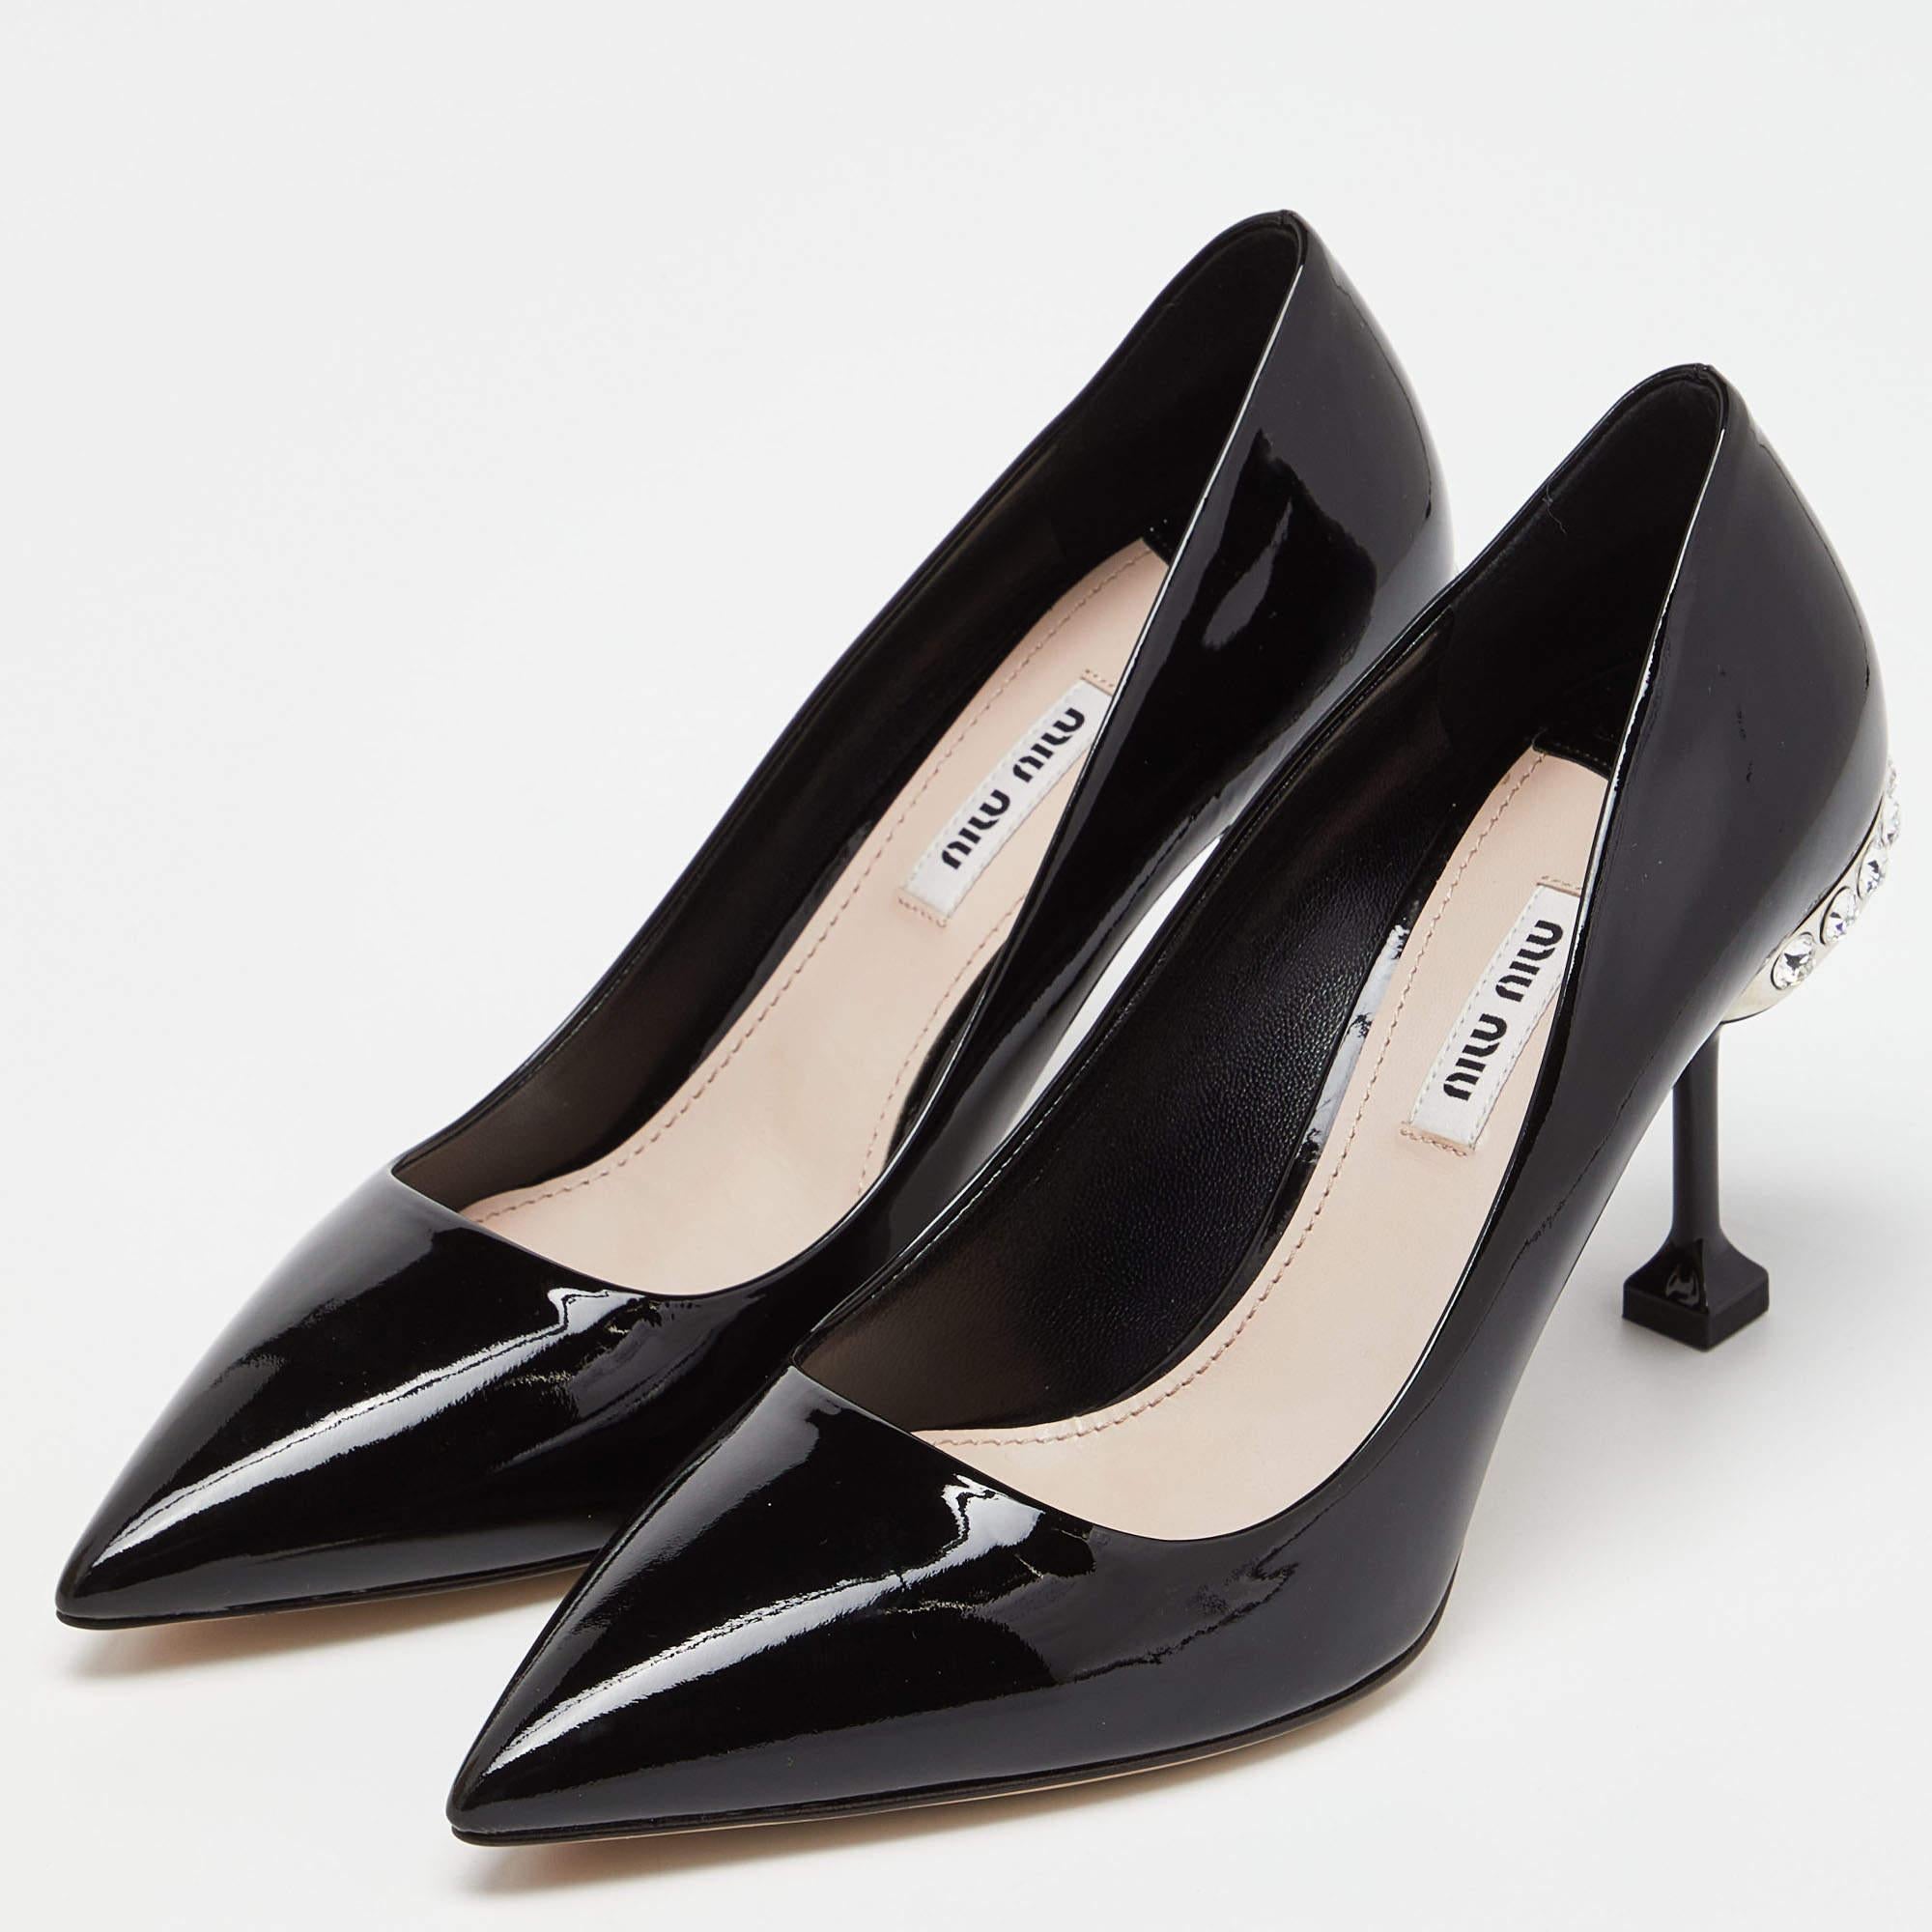 Make a chic style statement with these designer pumps. They showcase sturdy heels and durable soles, perfect for your fashionable outings!

Includes: Original Dustbag, Original Box, Extra Heel Tips